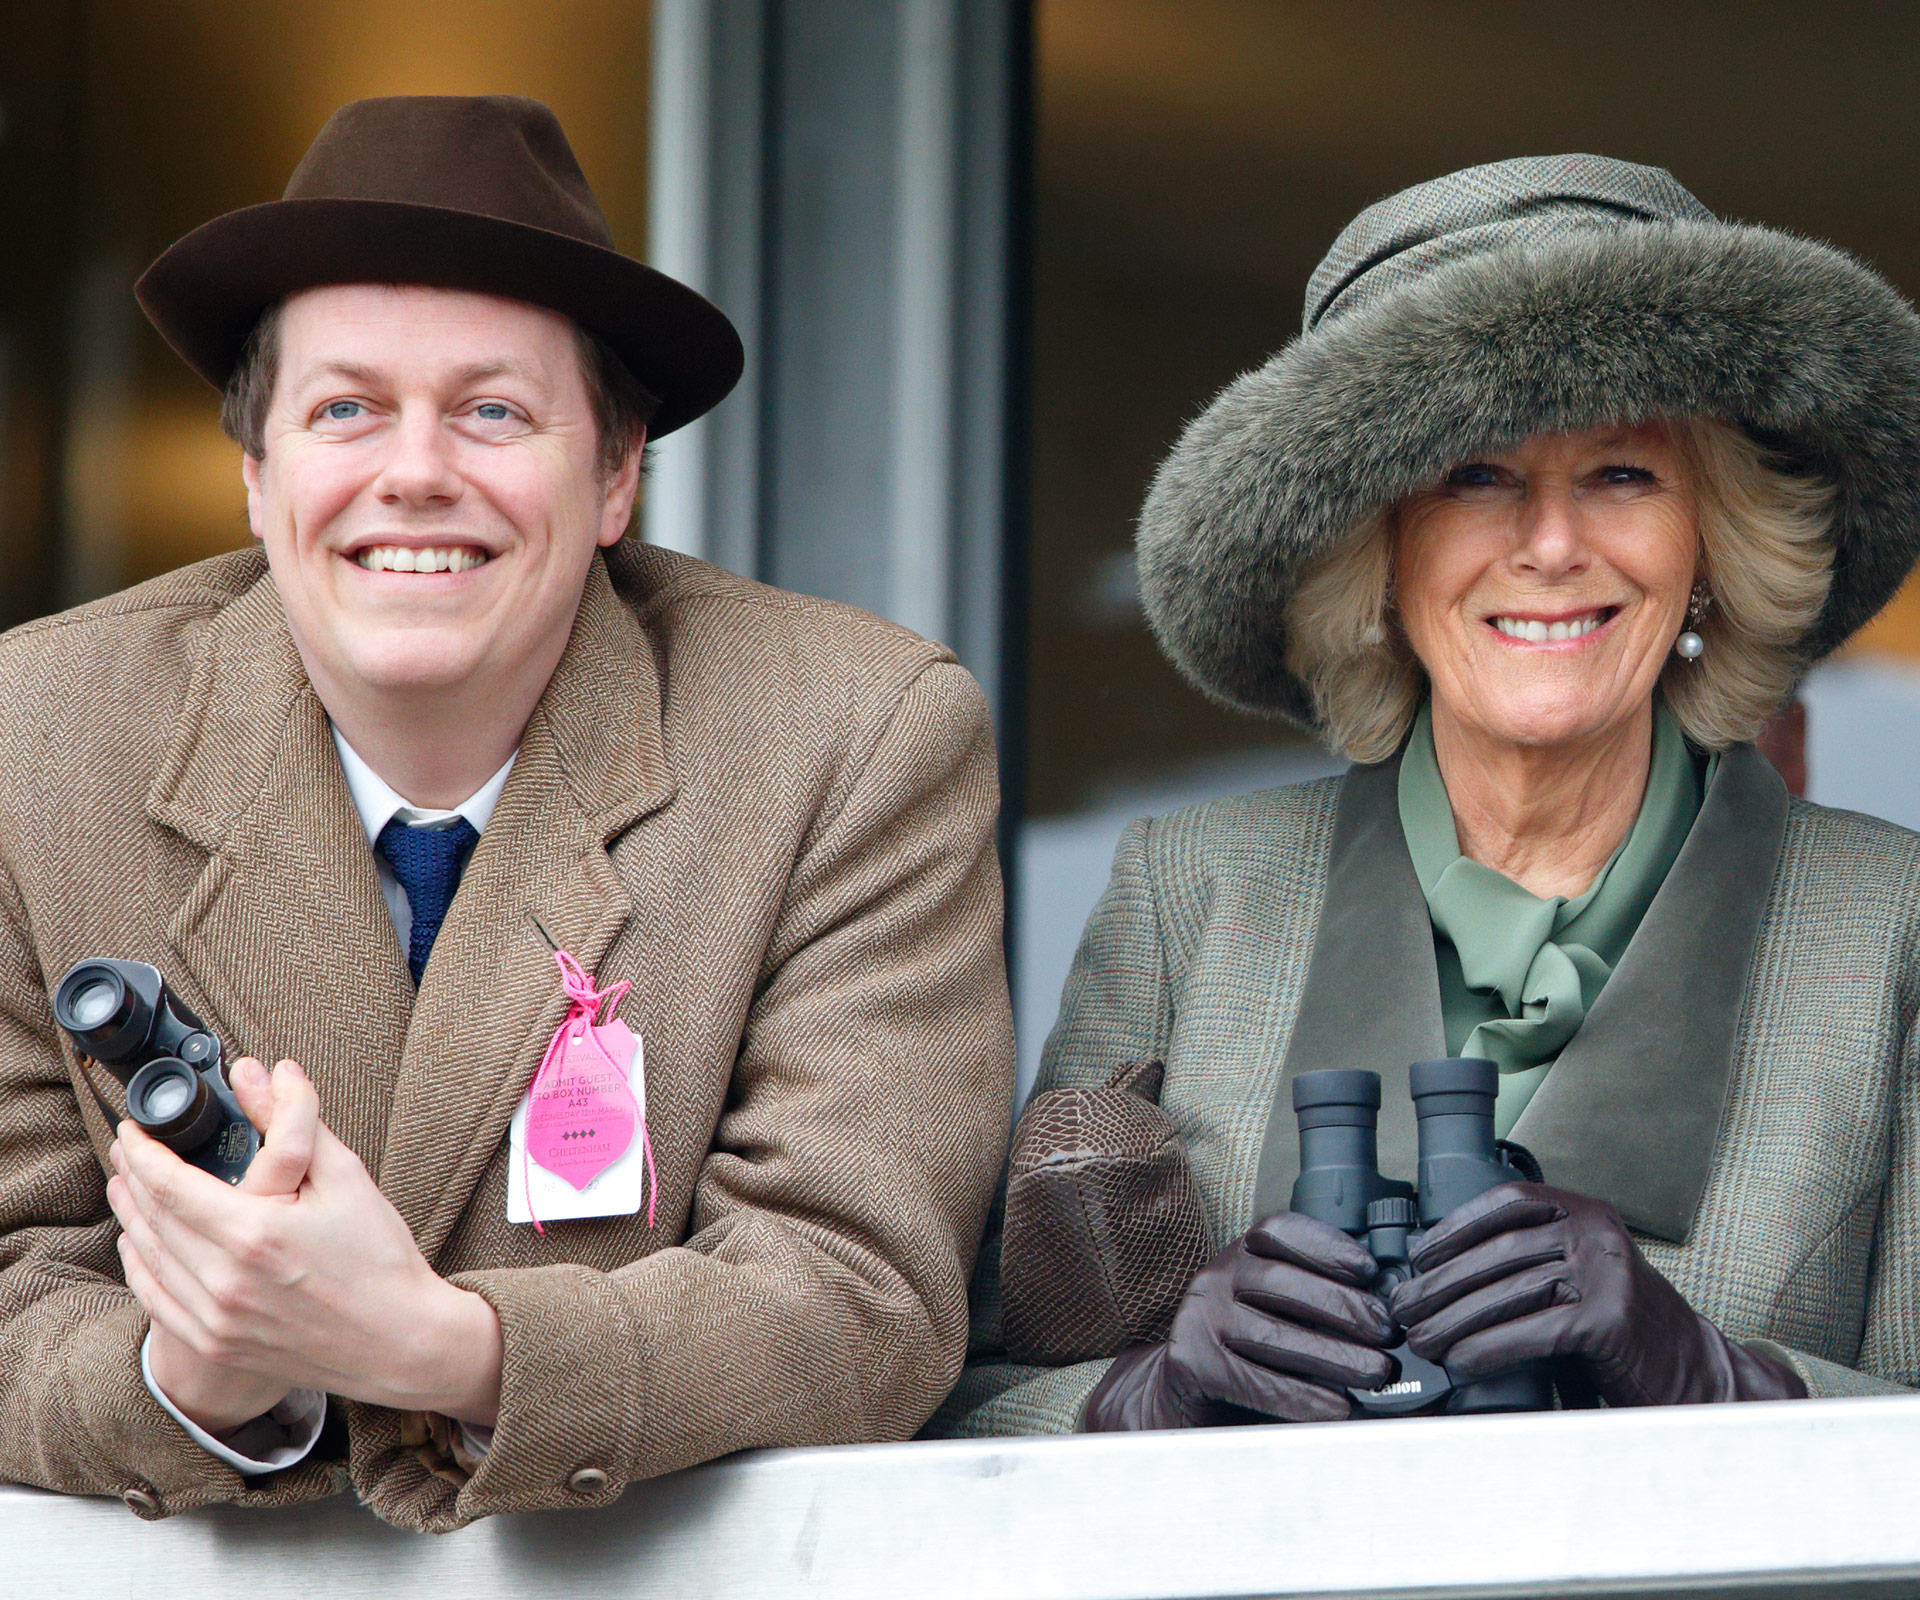 Tom Parker Bowles and Camilla the Duchess of Cornwall